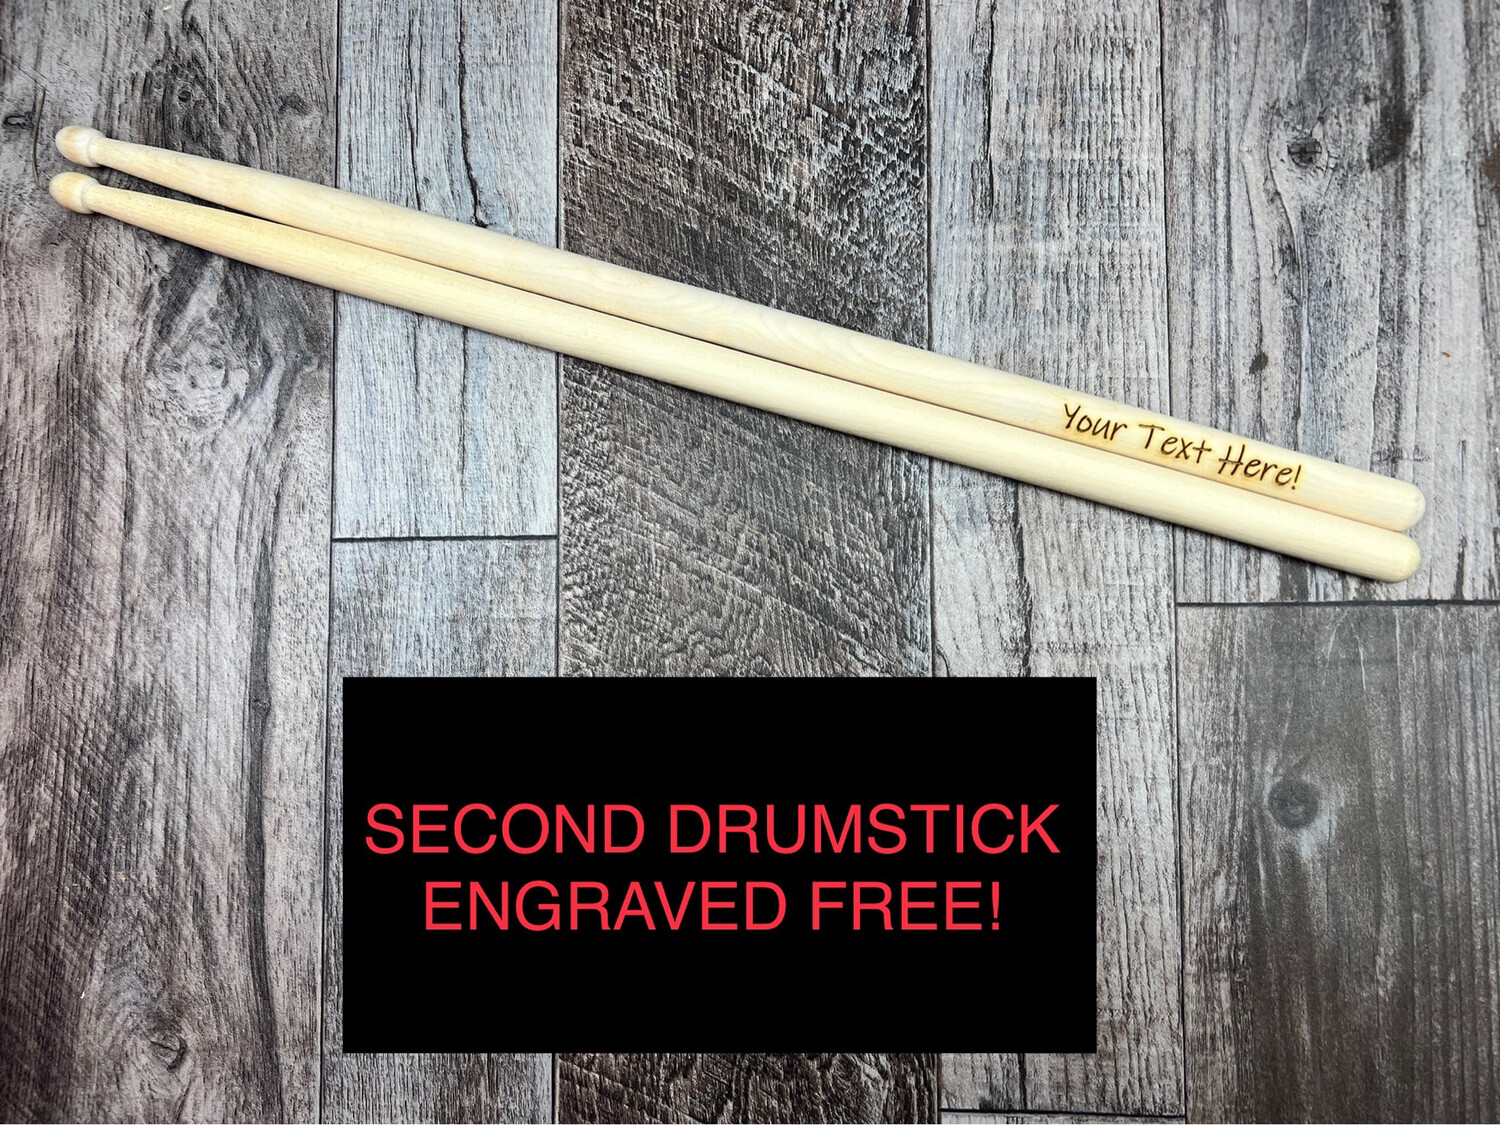 Personalized Engraved Drumsticks